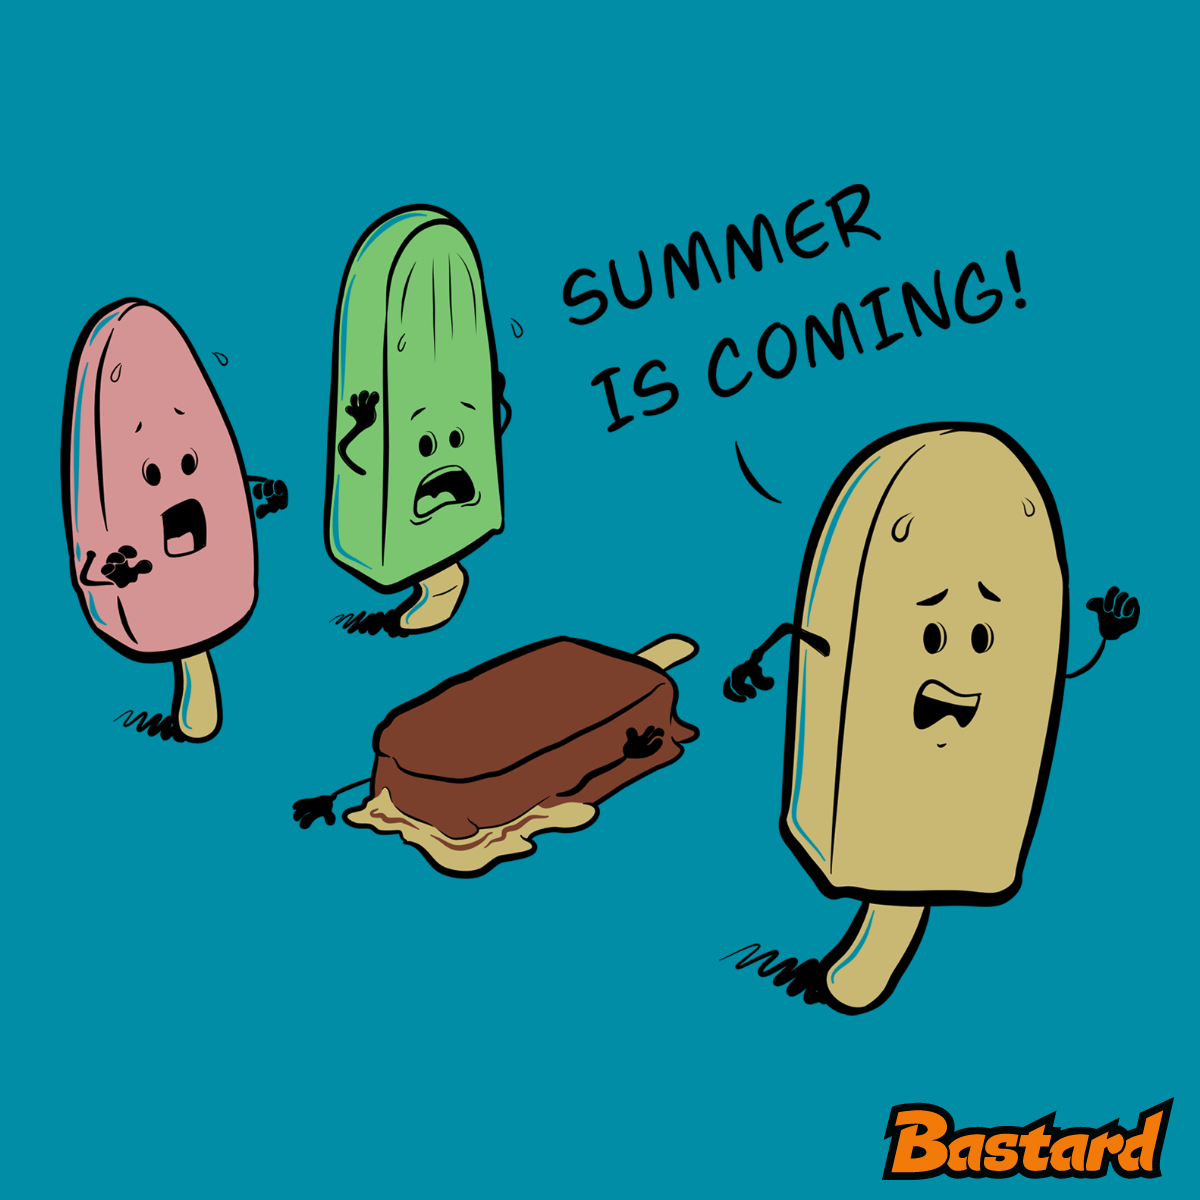 Summer is coming